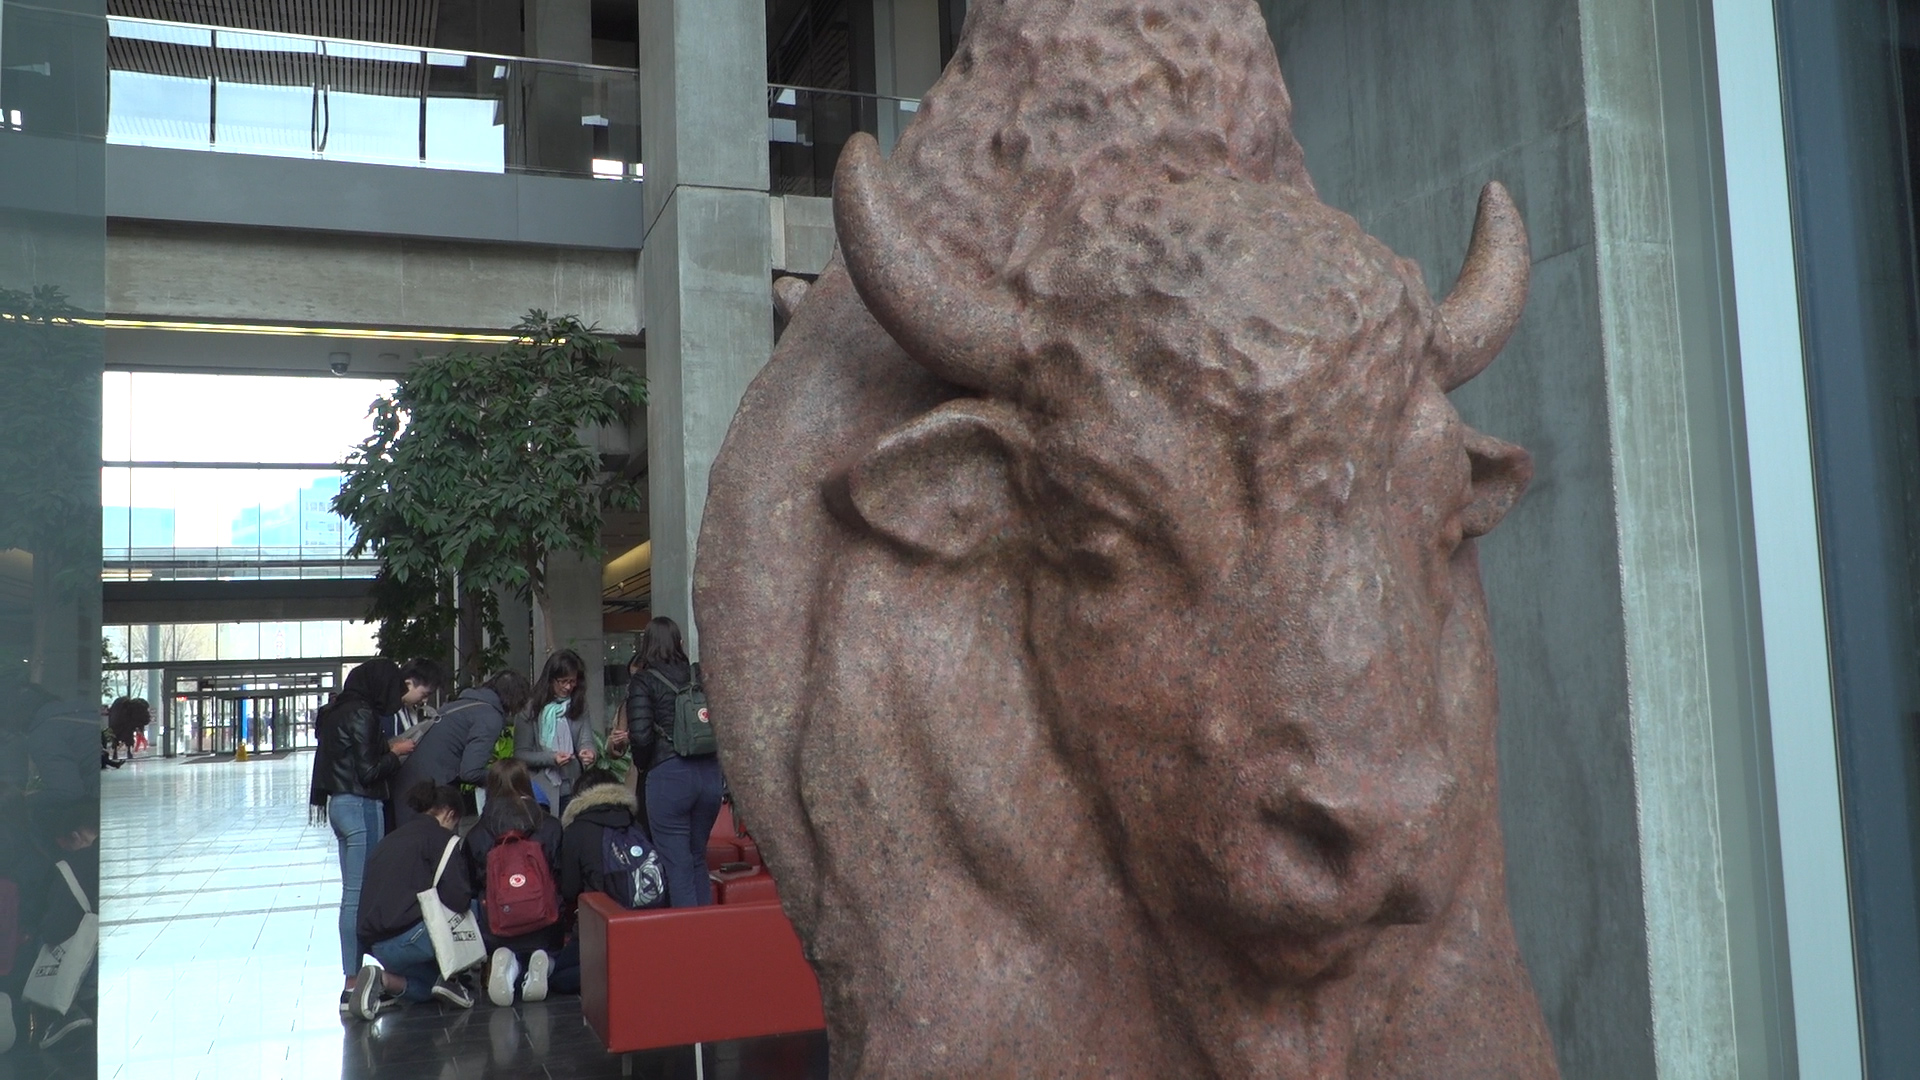 ...by discussing “The Bisons,” a sculpture by Joe Fafard located in Manitoba Hydro Place.